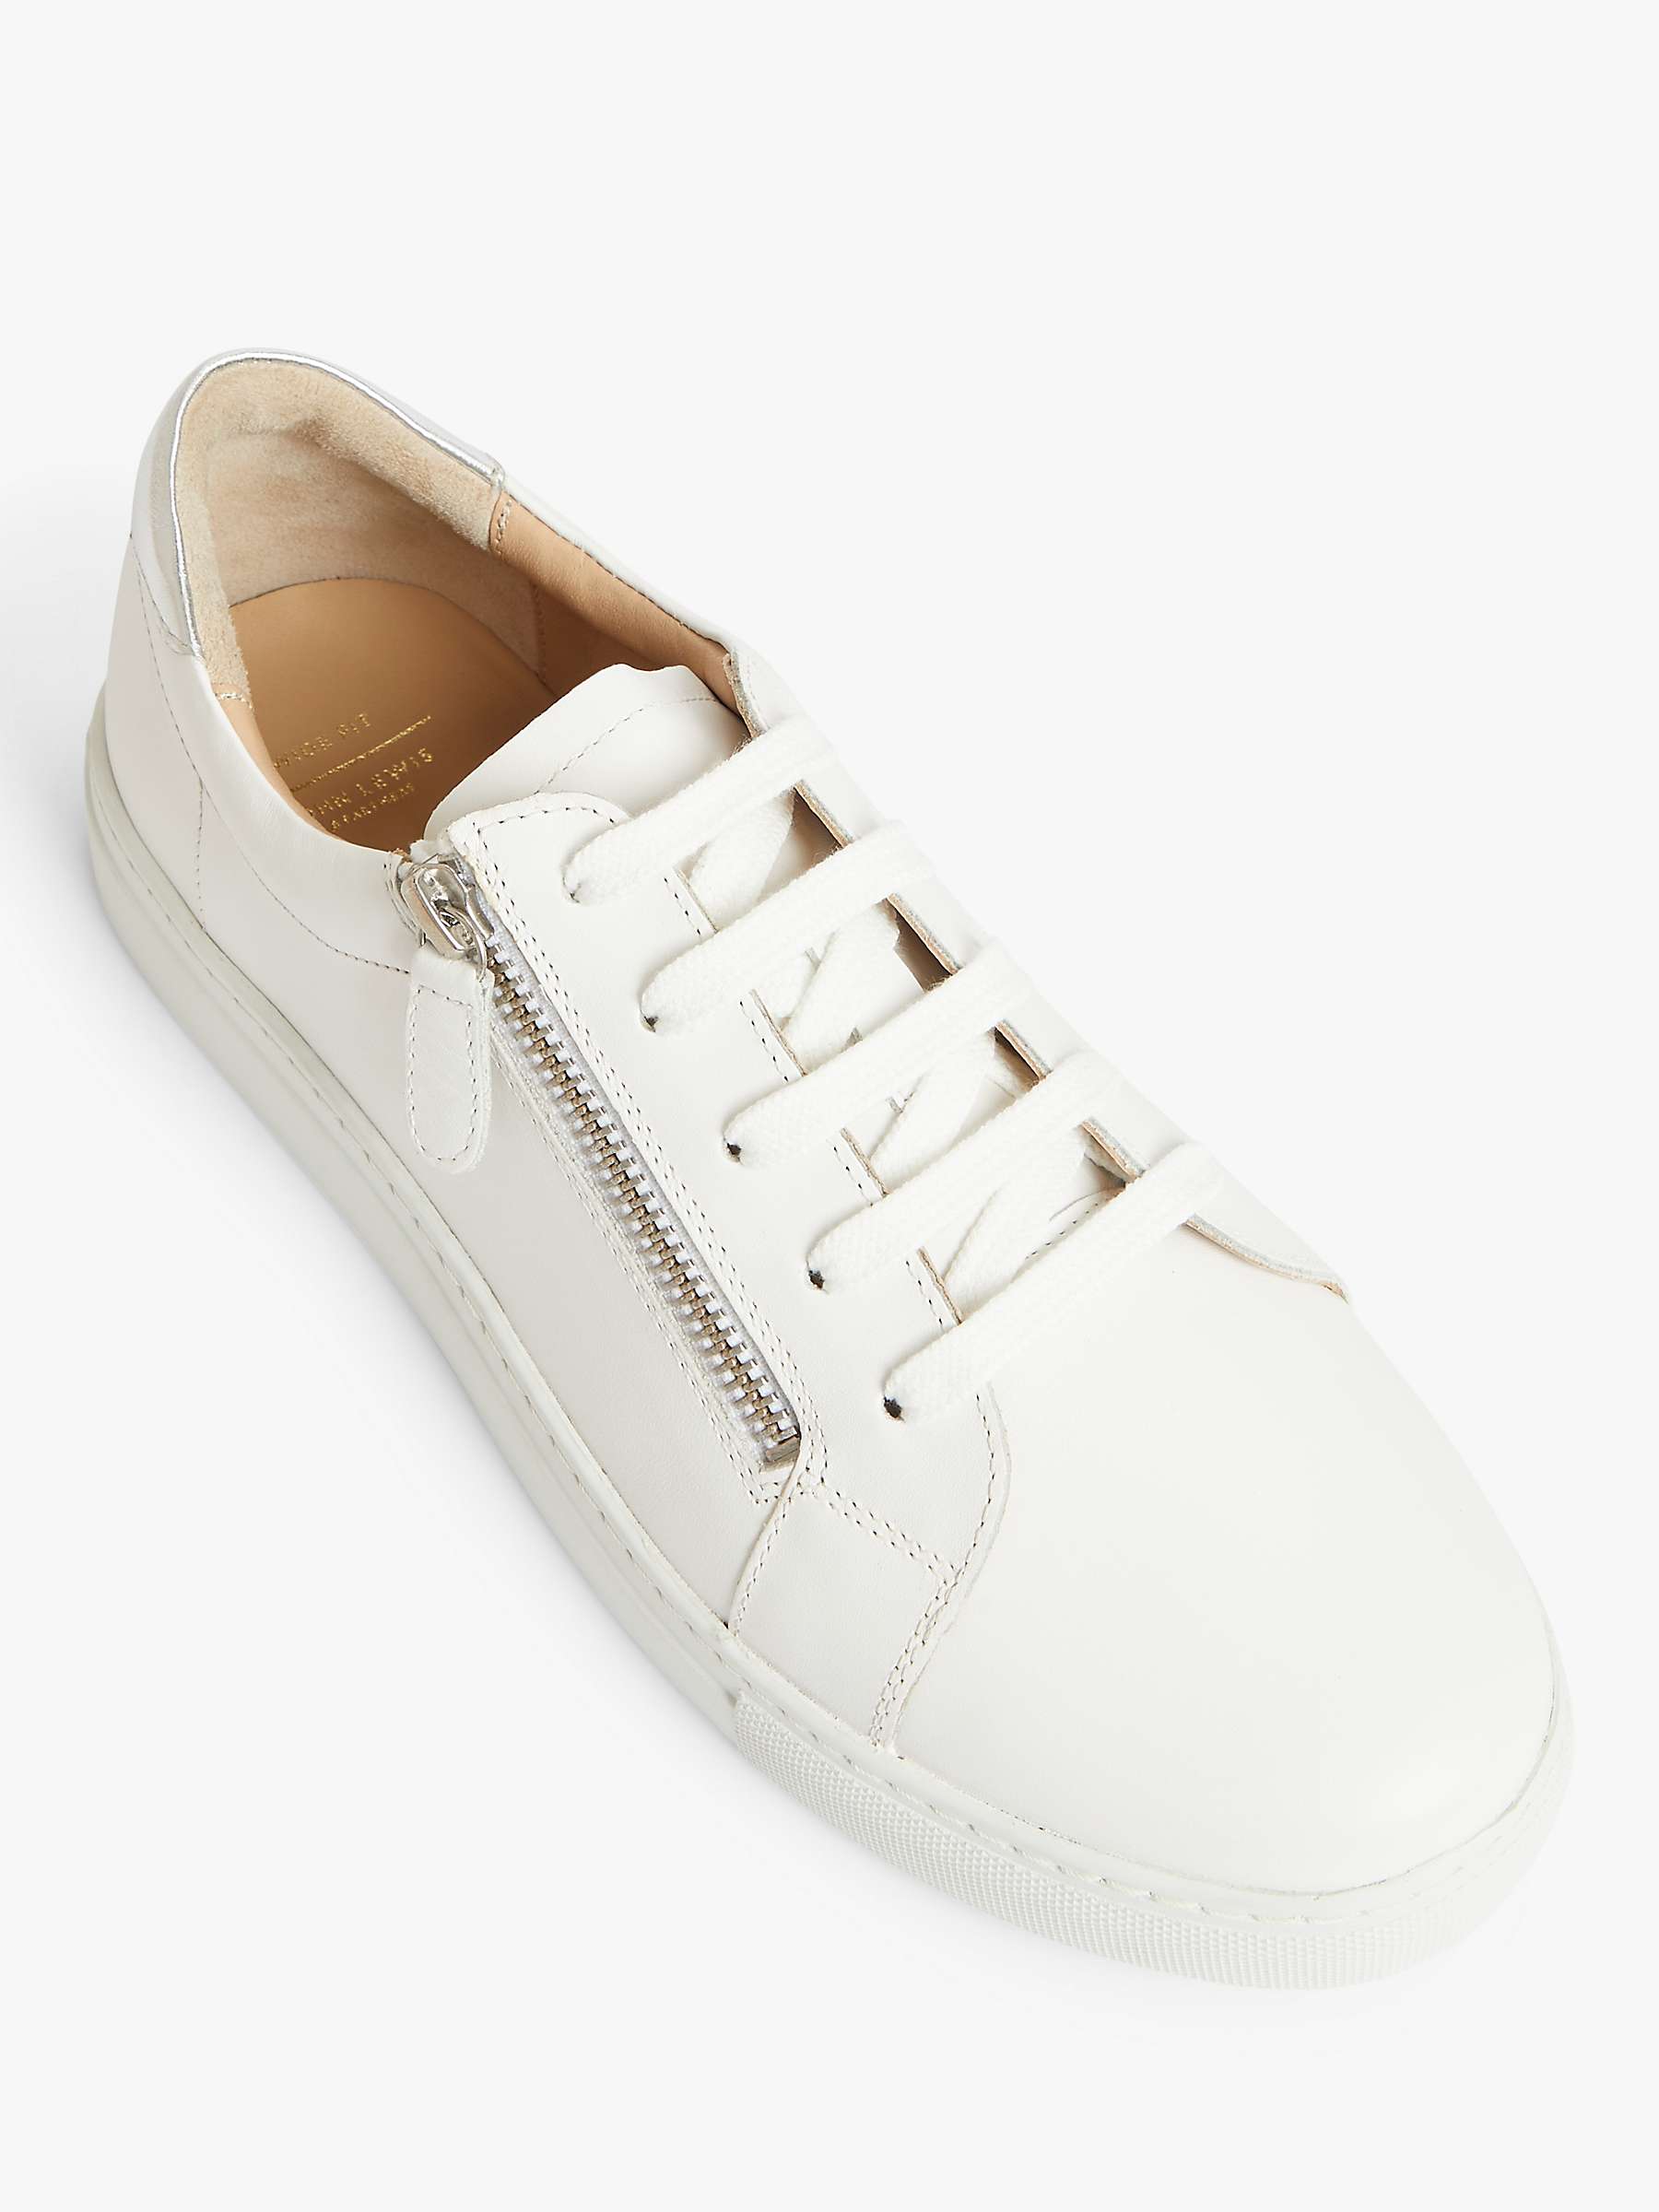 Buy John Lewis Edison Wide Fit Leather Trainers, White Online at johnlewis.com